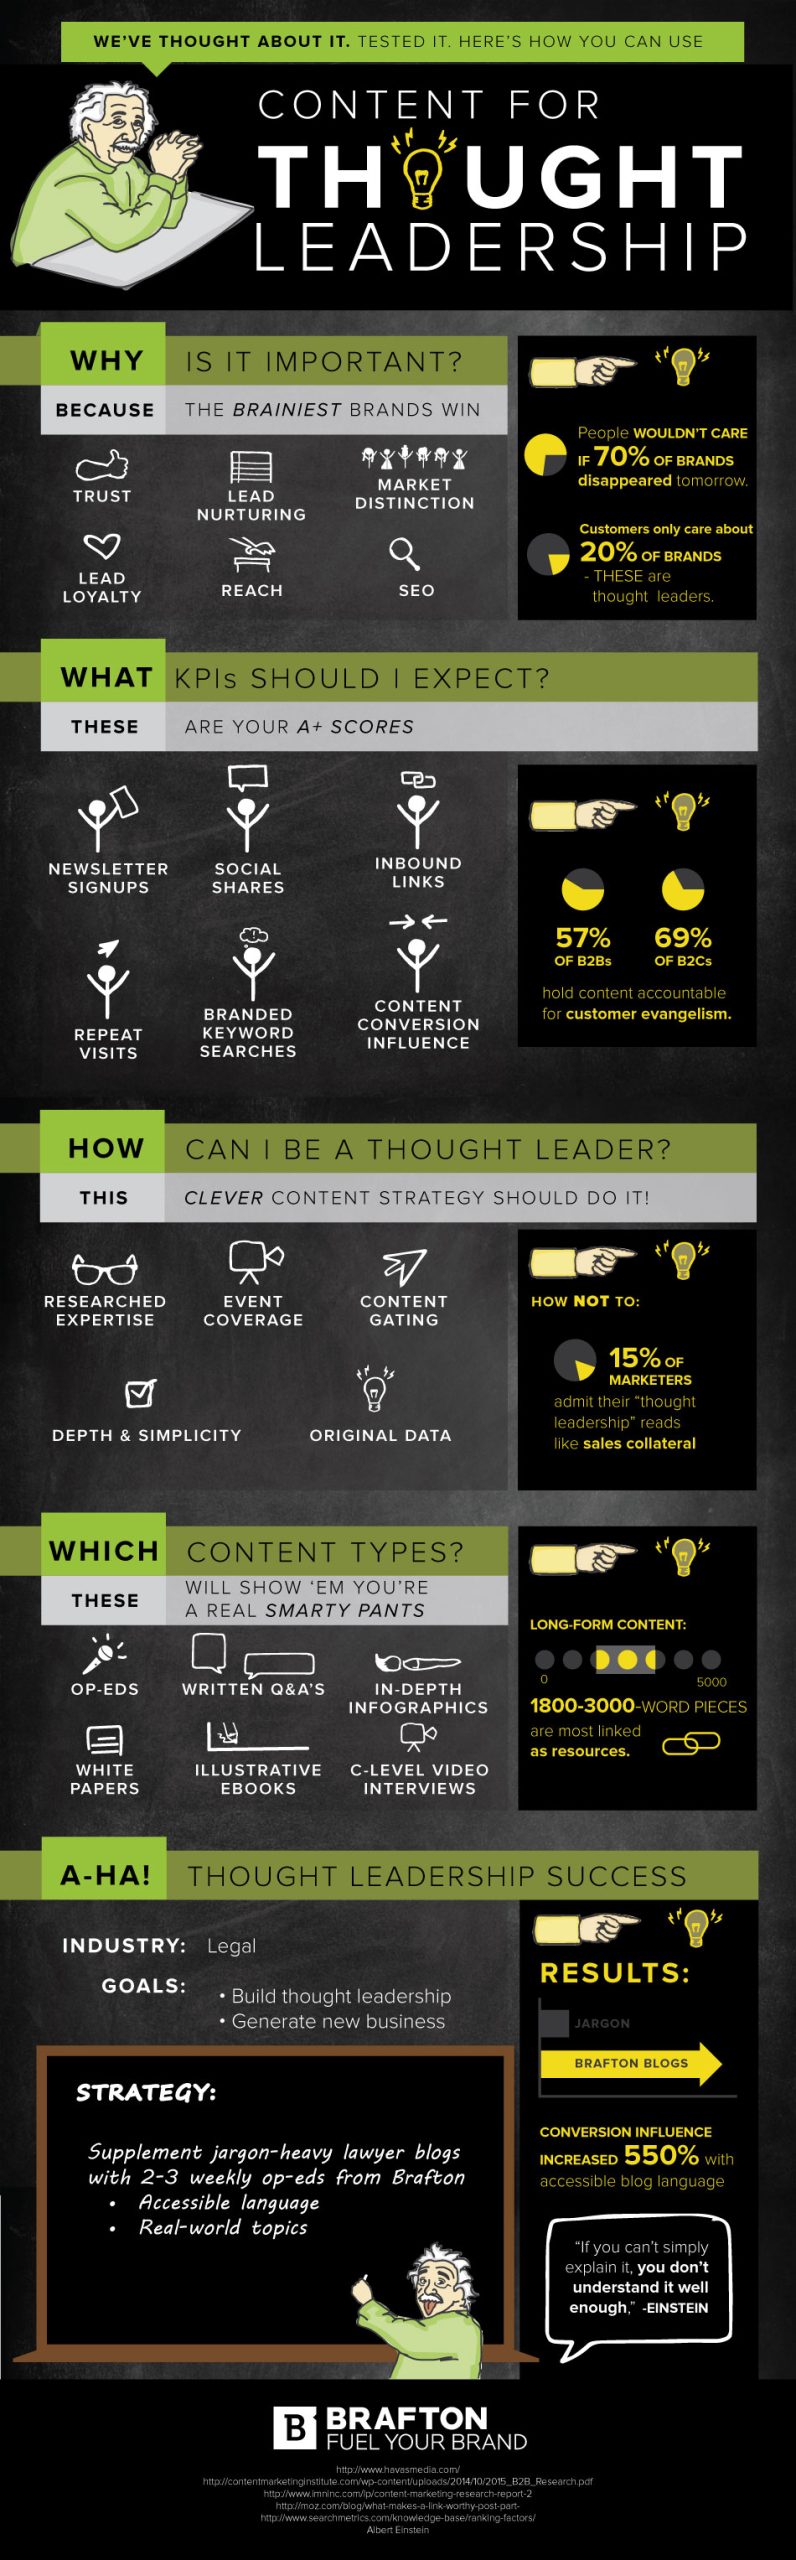 How companies can create content that promotes thought leadership.